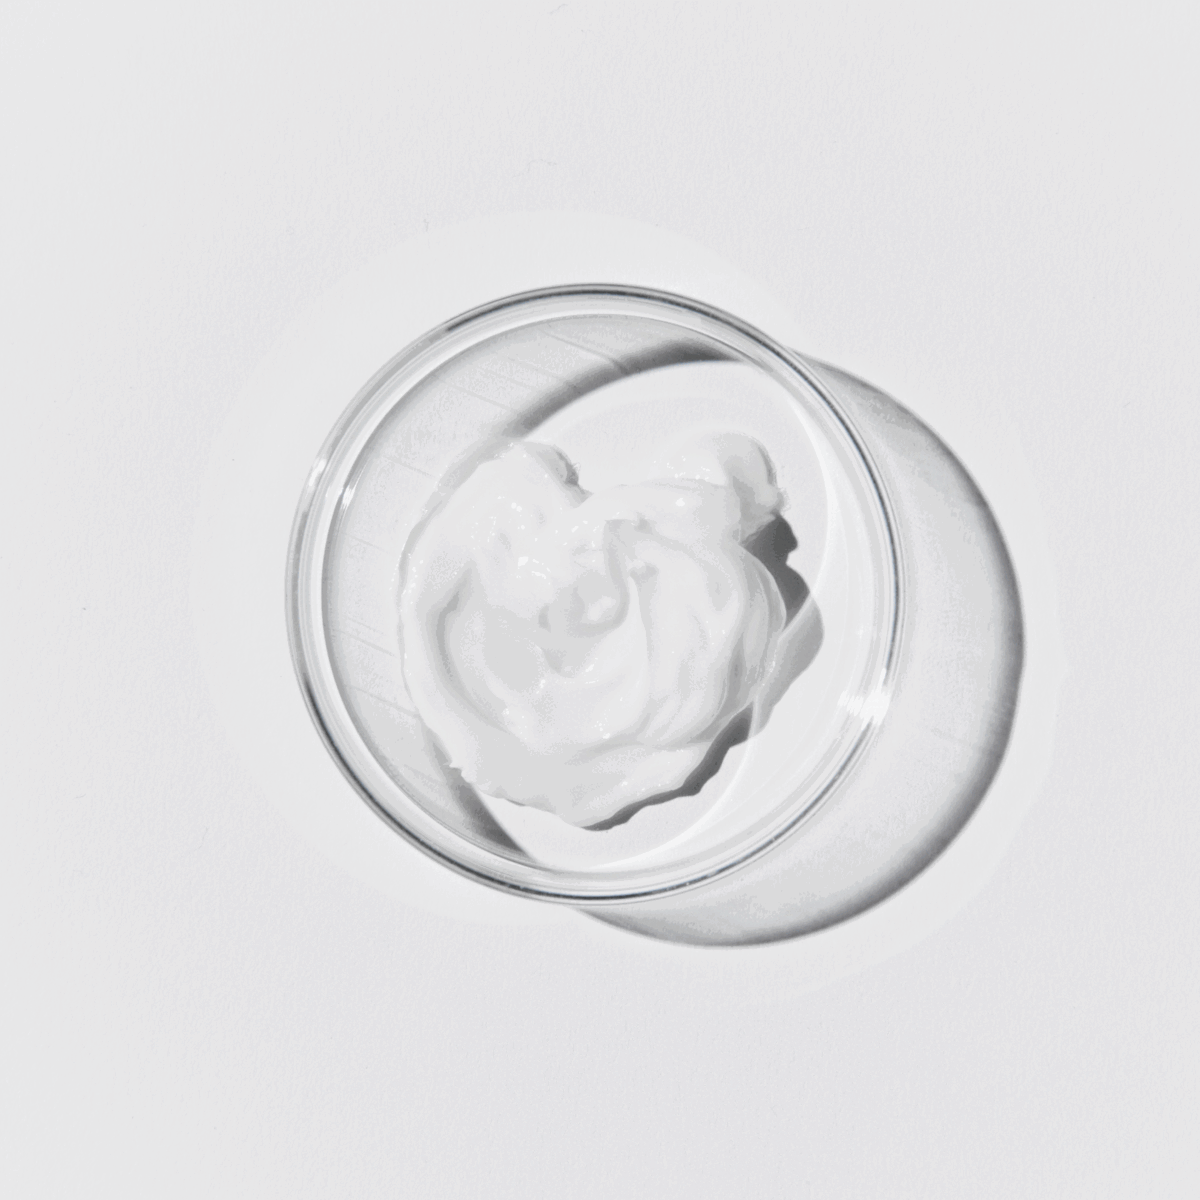 Animated gif showing the different consistencies of the products inside the kit - creams and oils